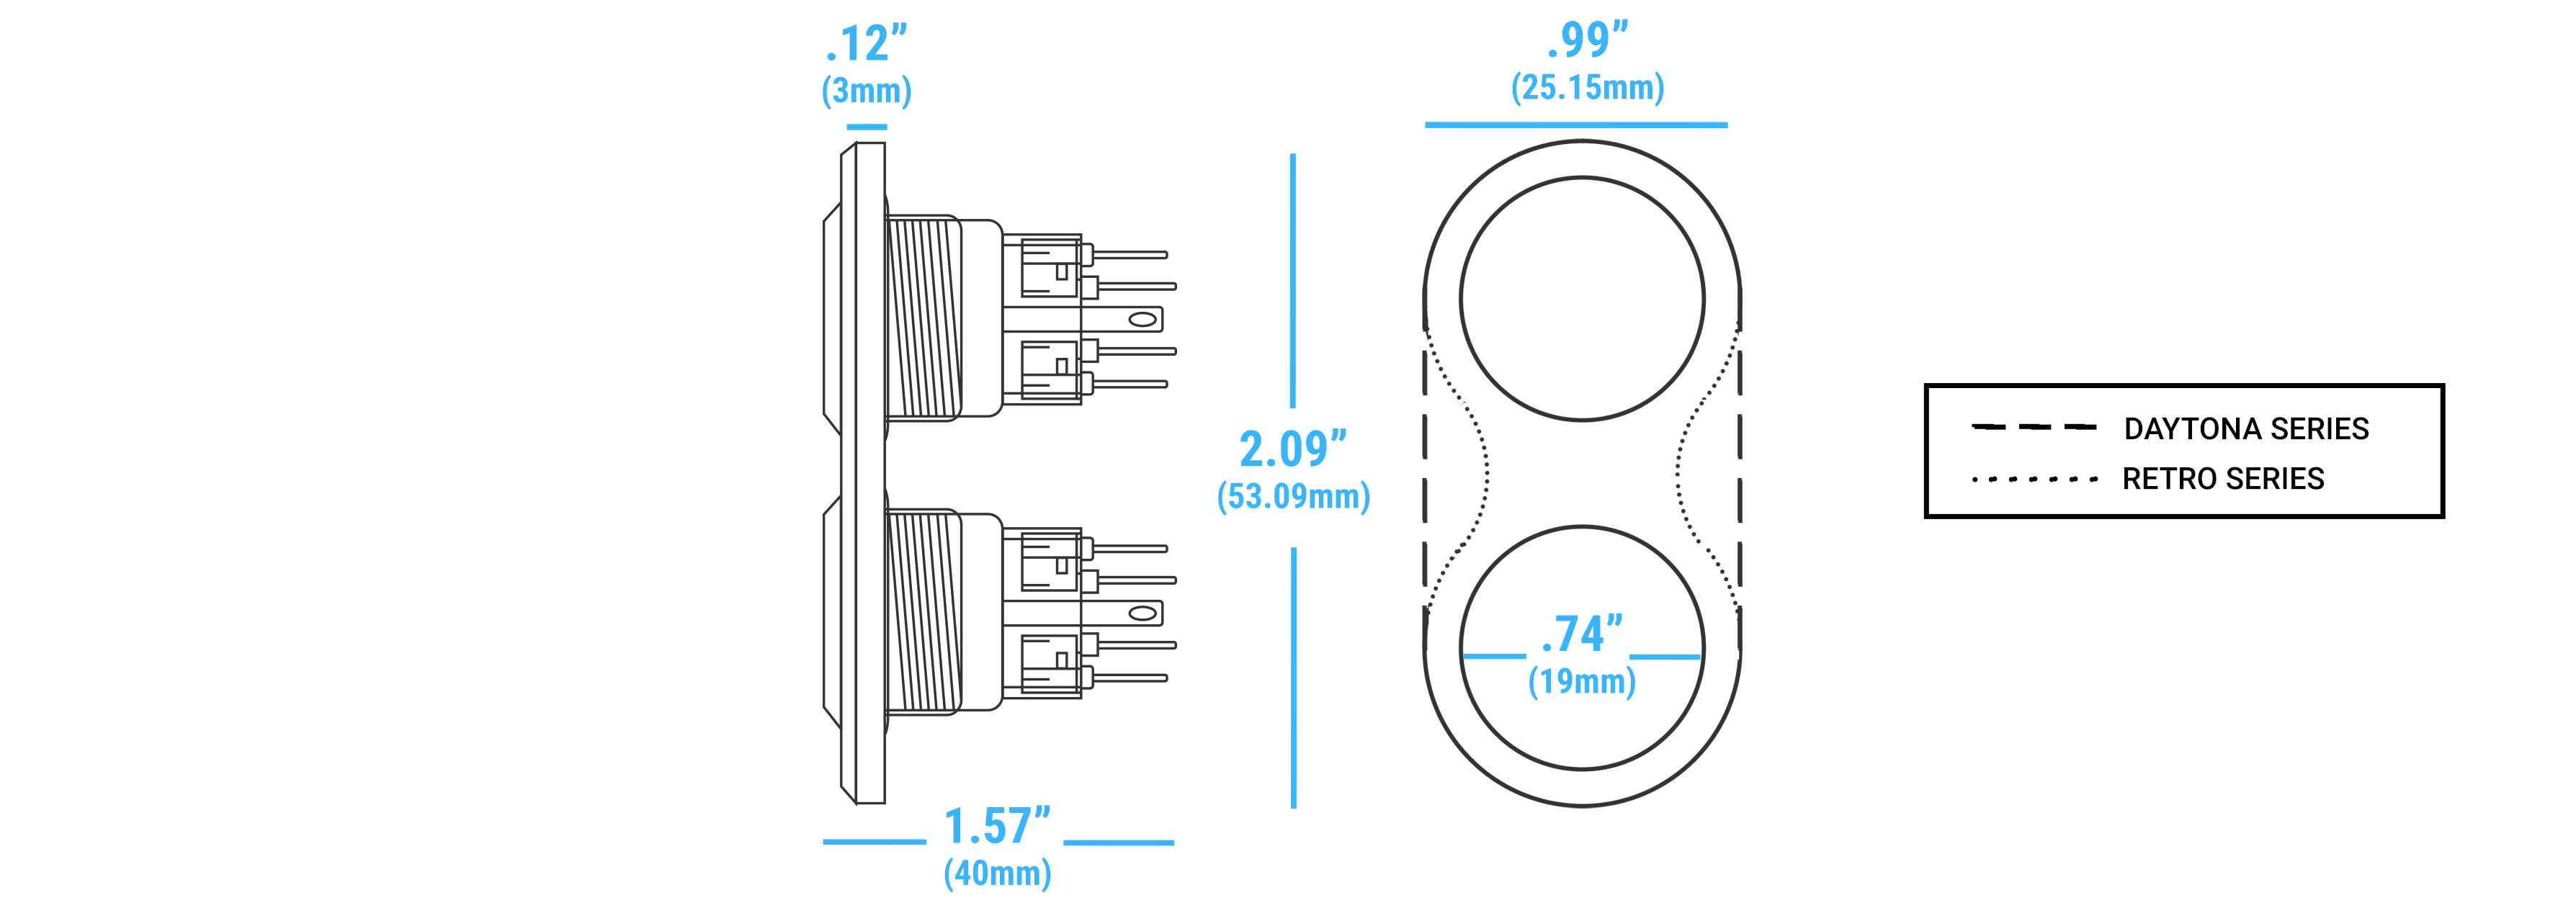 Billet Switch Specifications and Dimensions